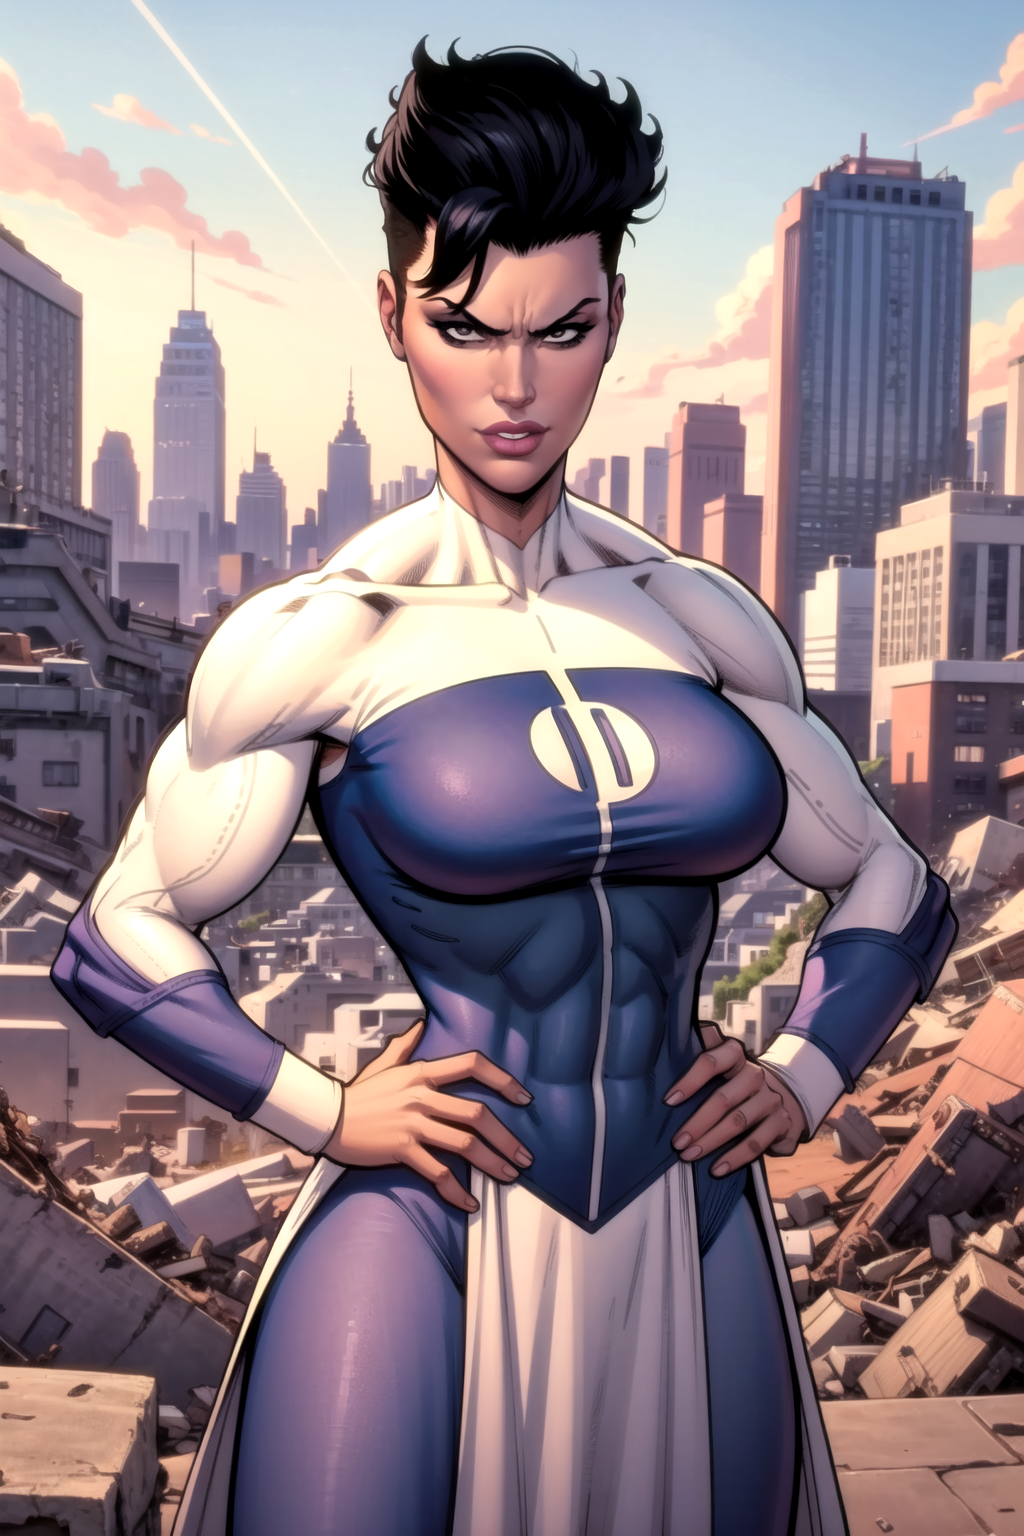 The superheroine in a blue and white costume posing in the city.